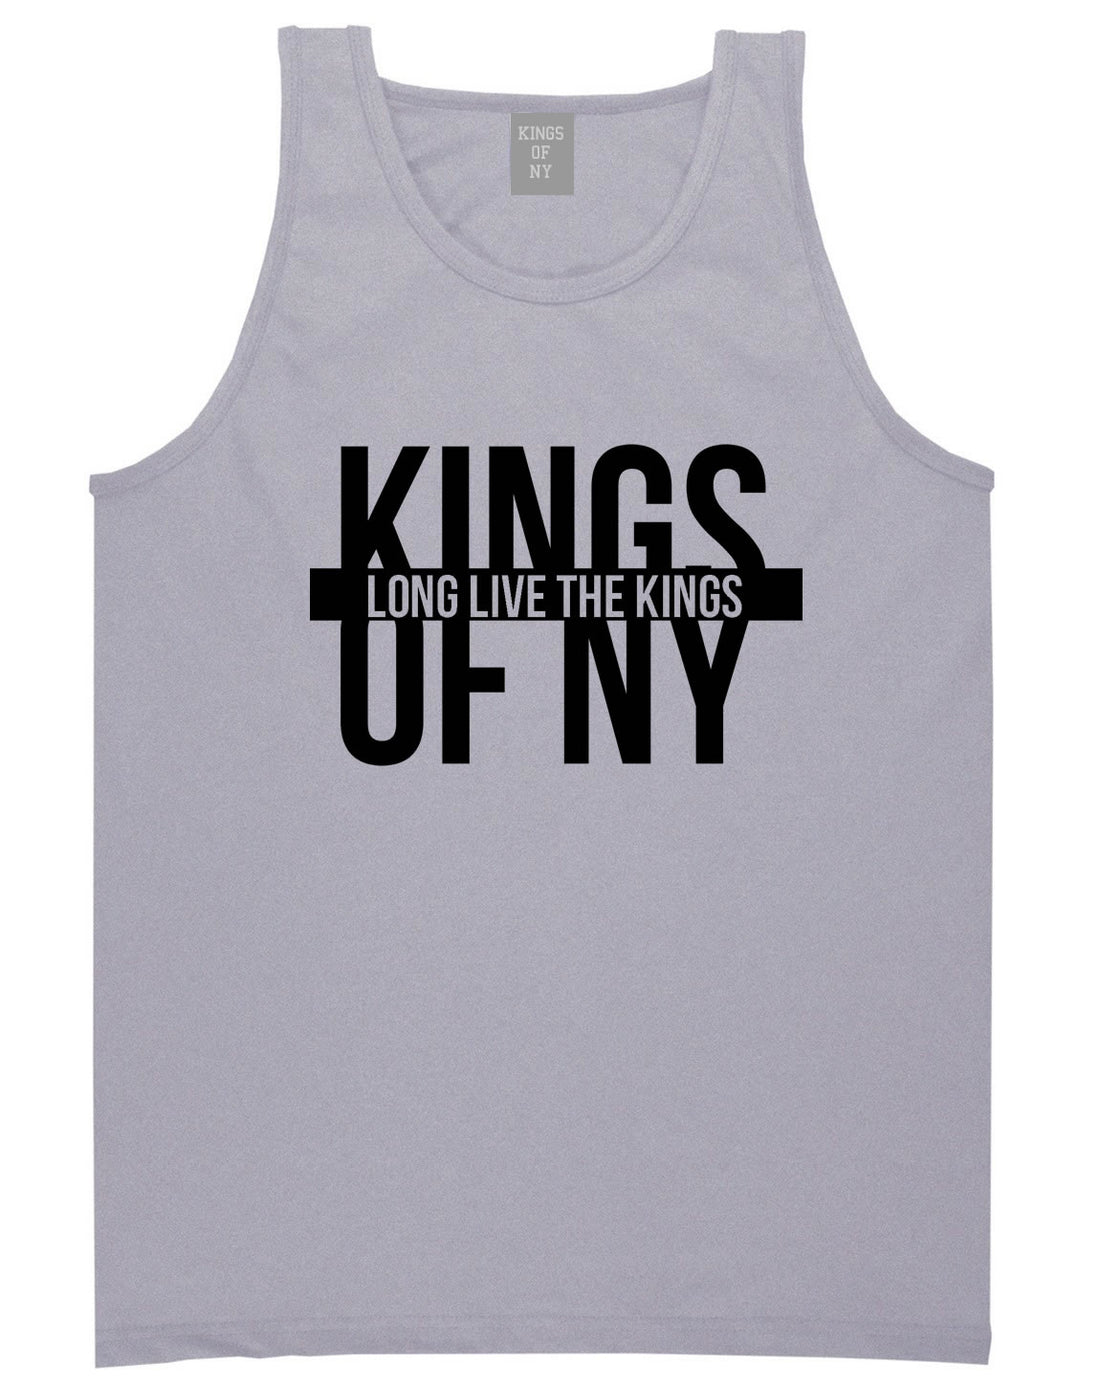 Long Live the Kings Tank Top in Grey by Kings Of NY